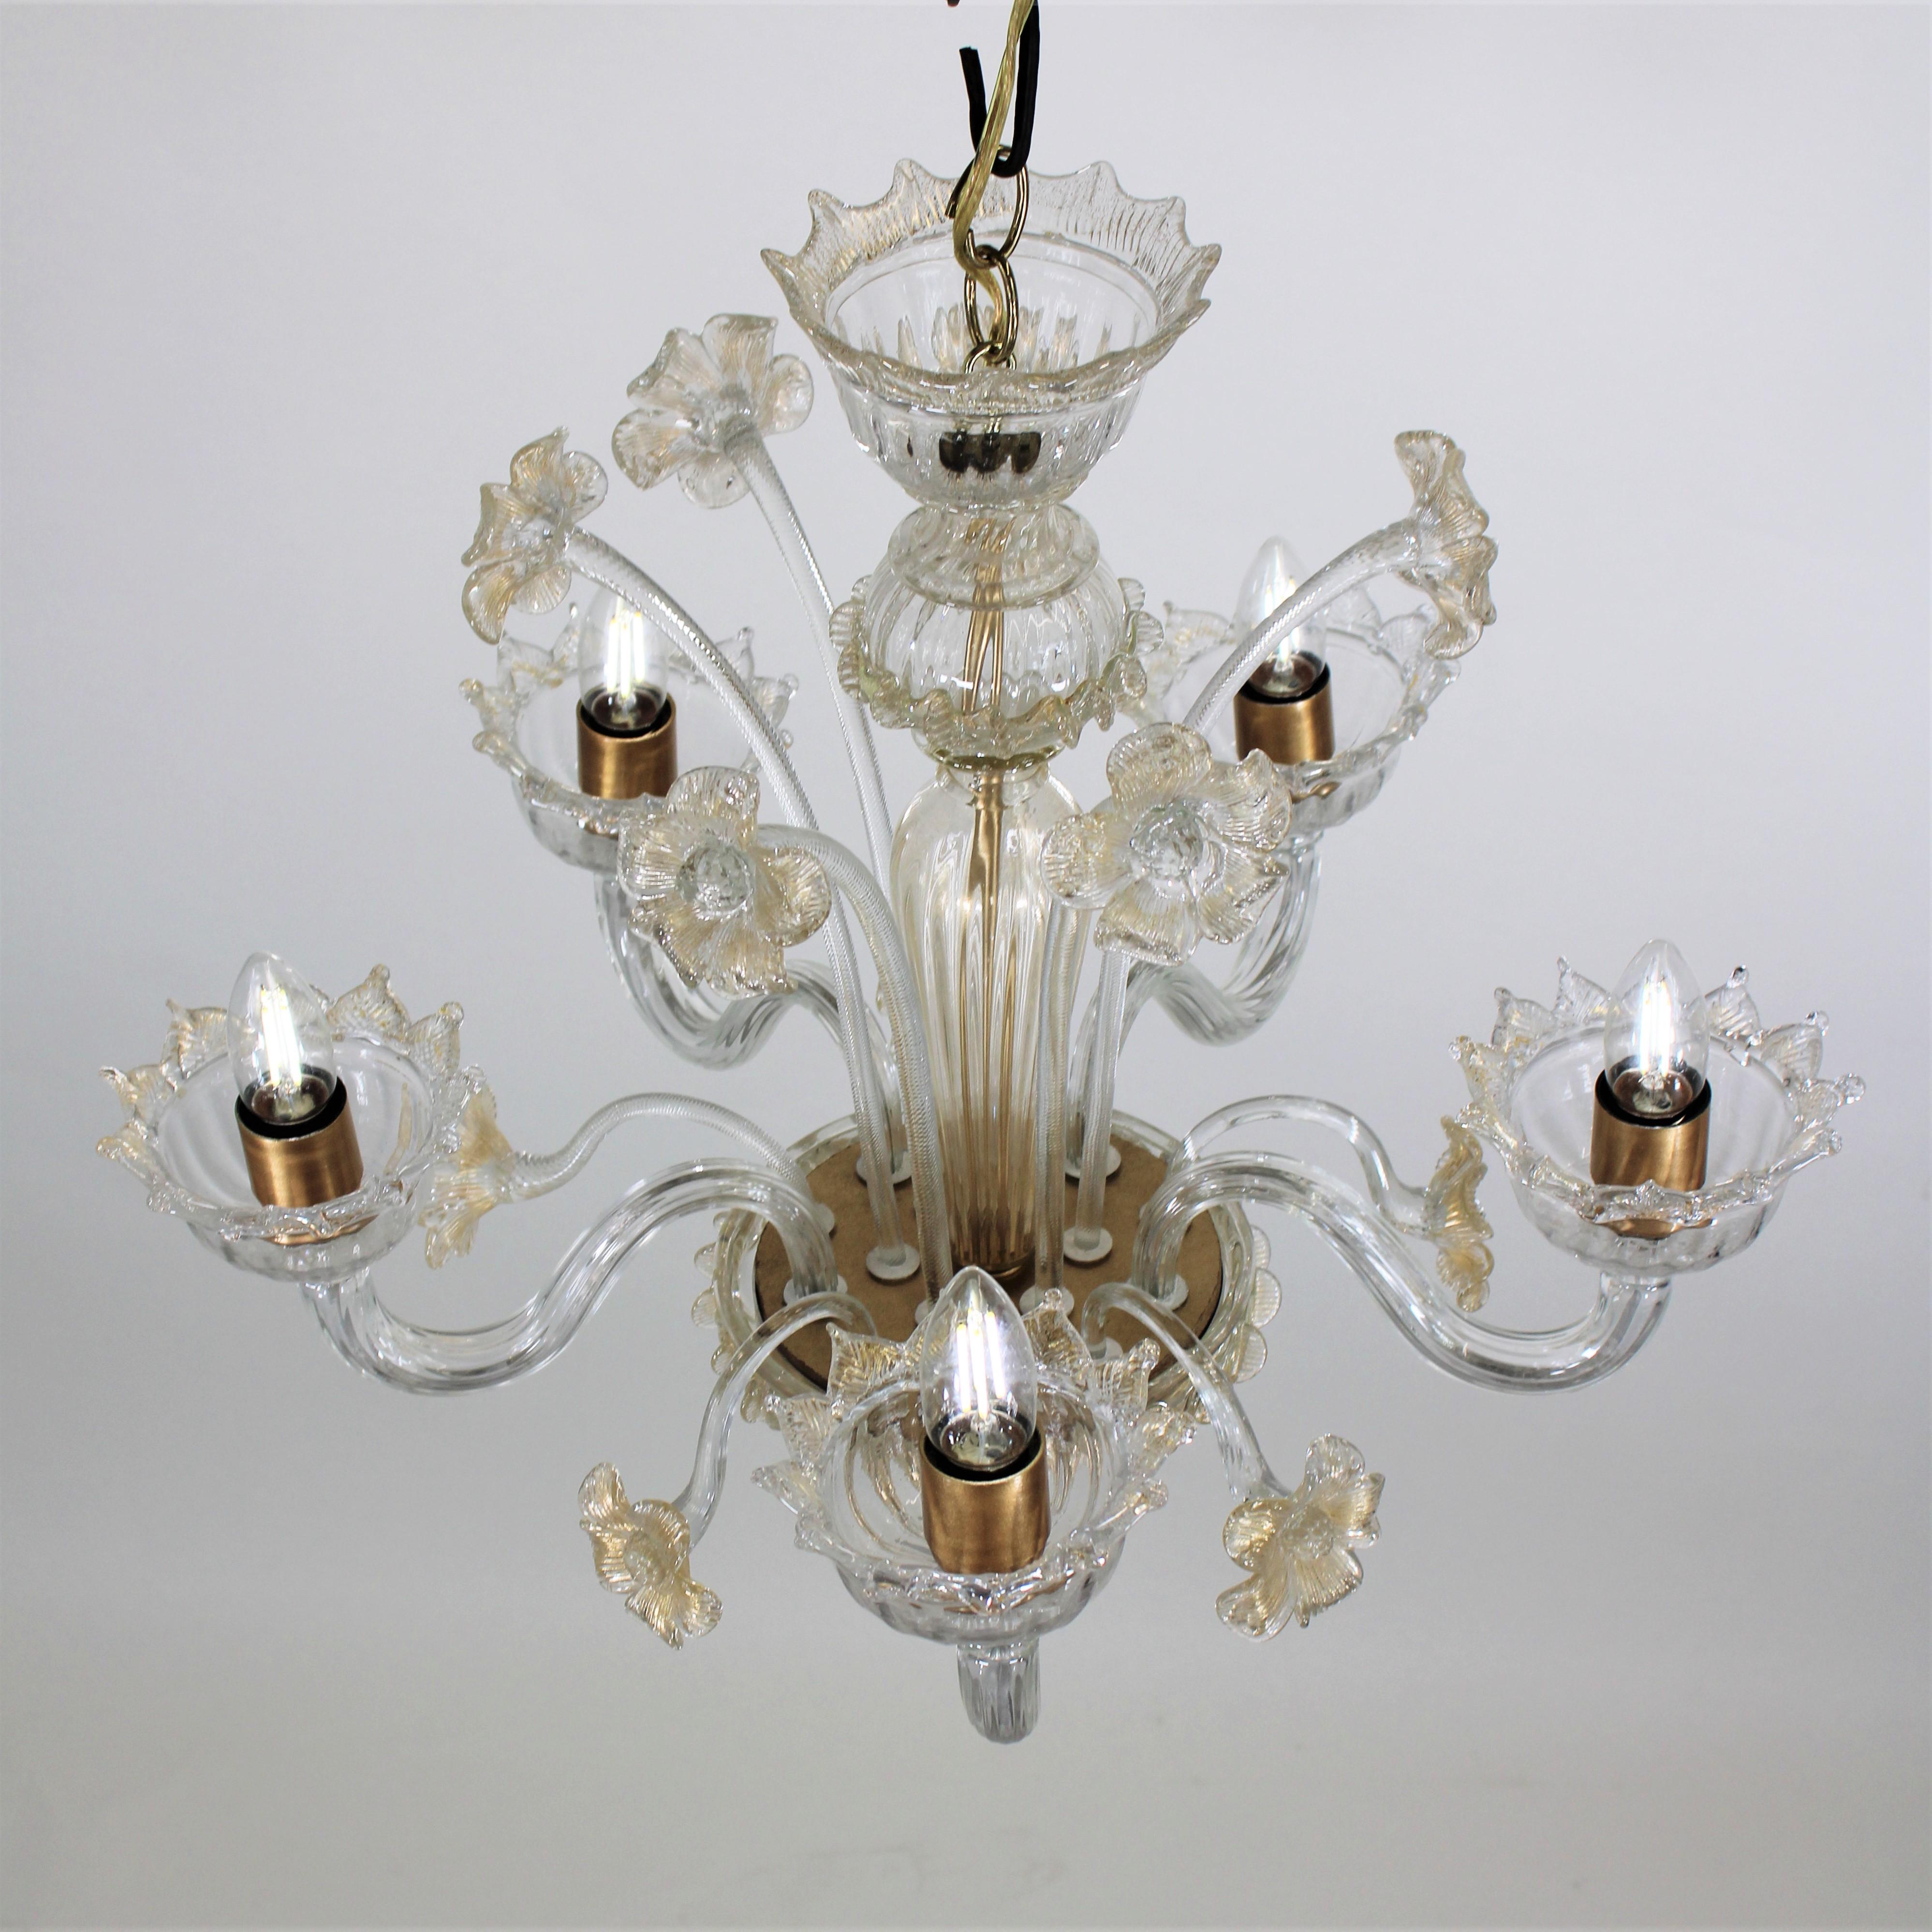 Vintage Baroque Style Five Arm Gold Infused Cristallo Murano Glass Chandelier In Good Condition For Sale In Chicago, IL